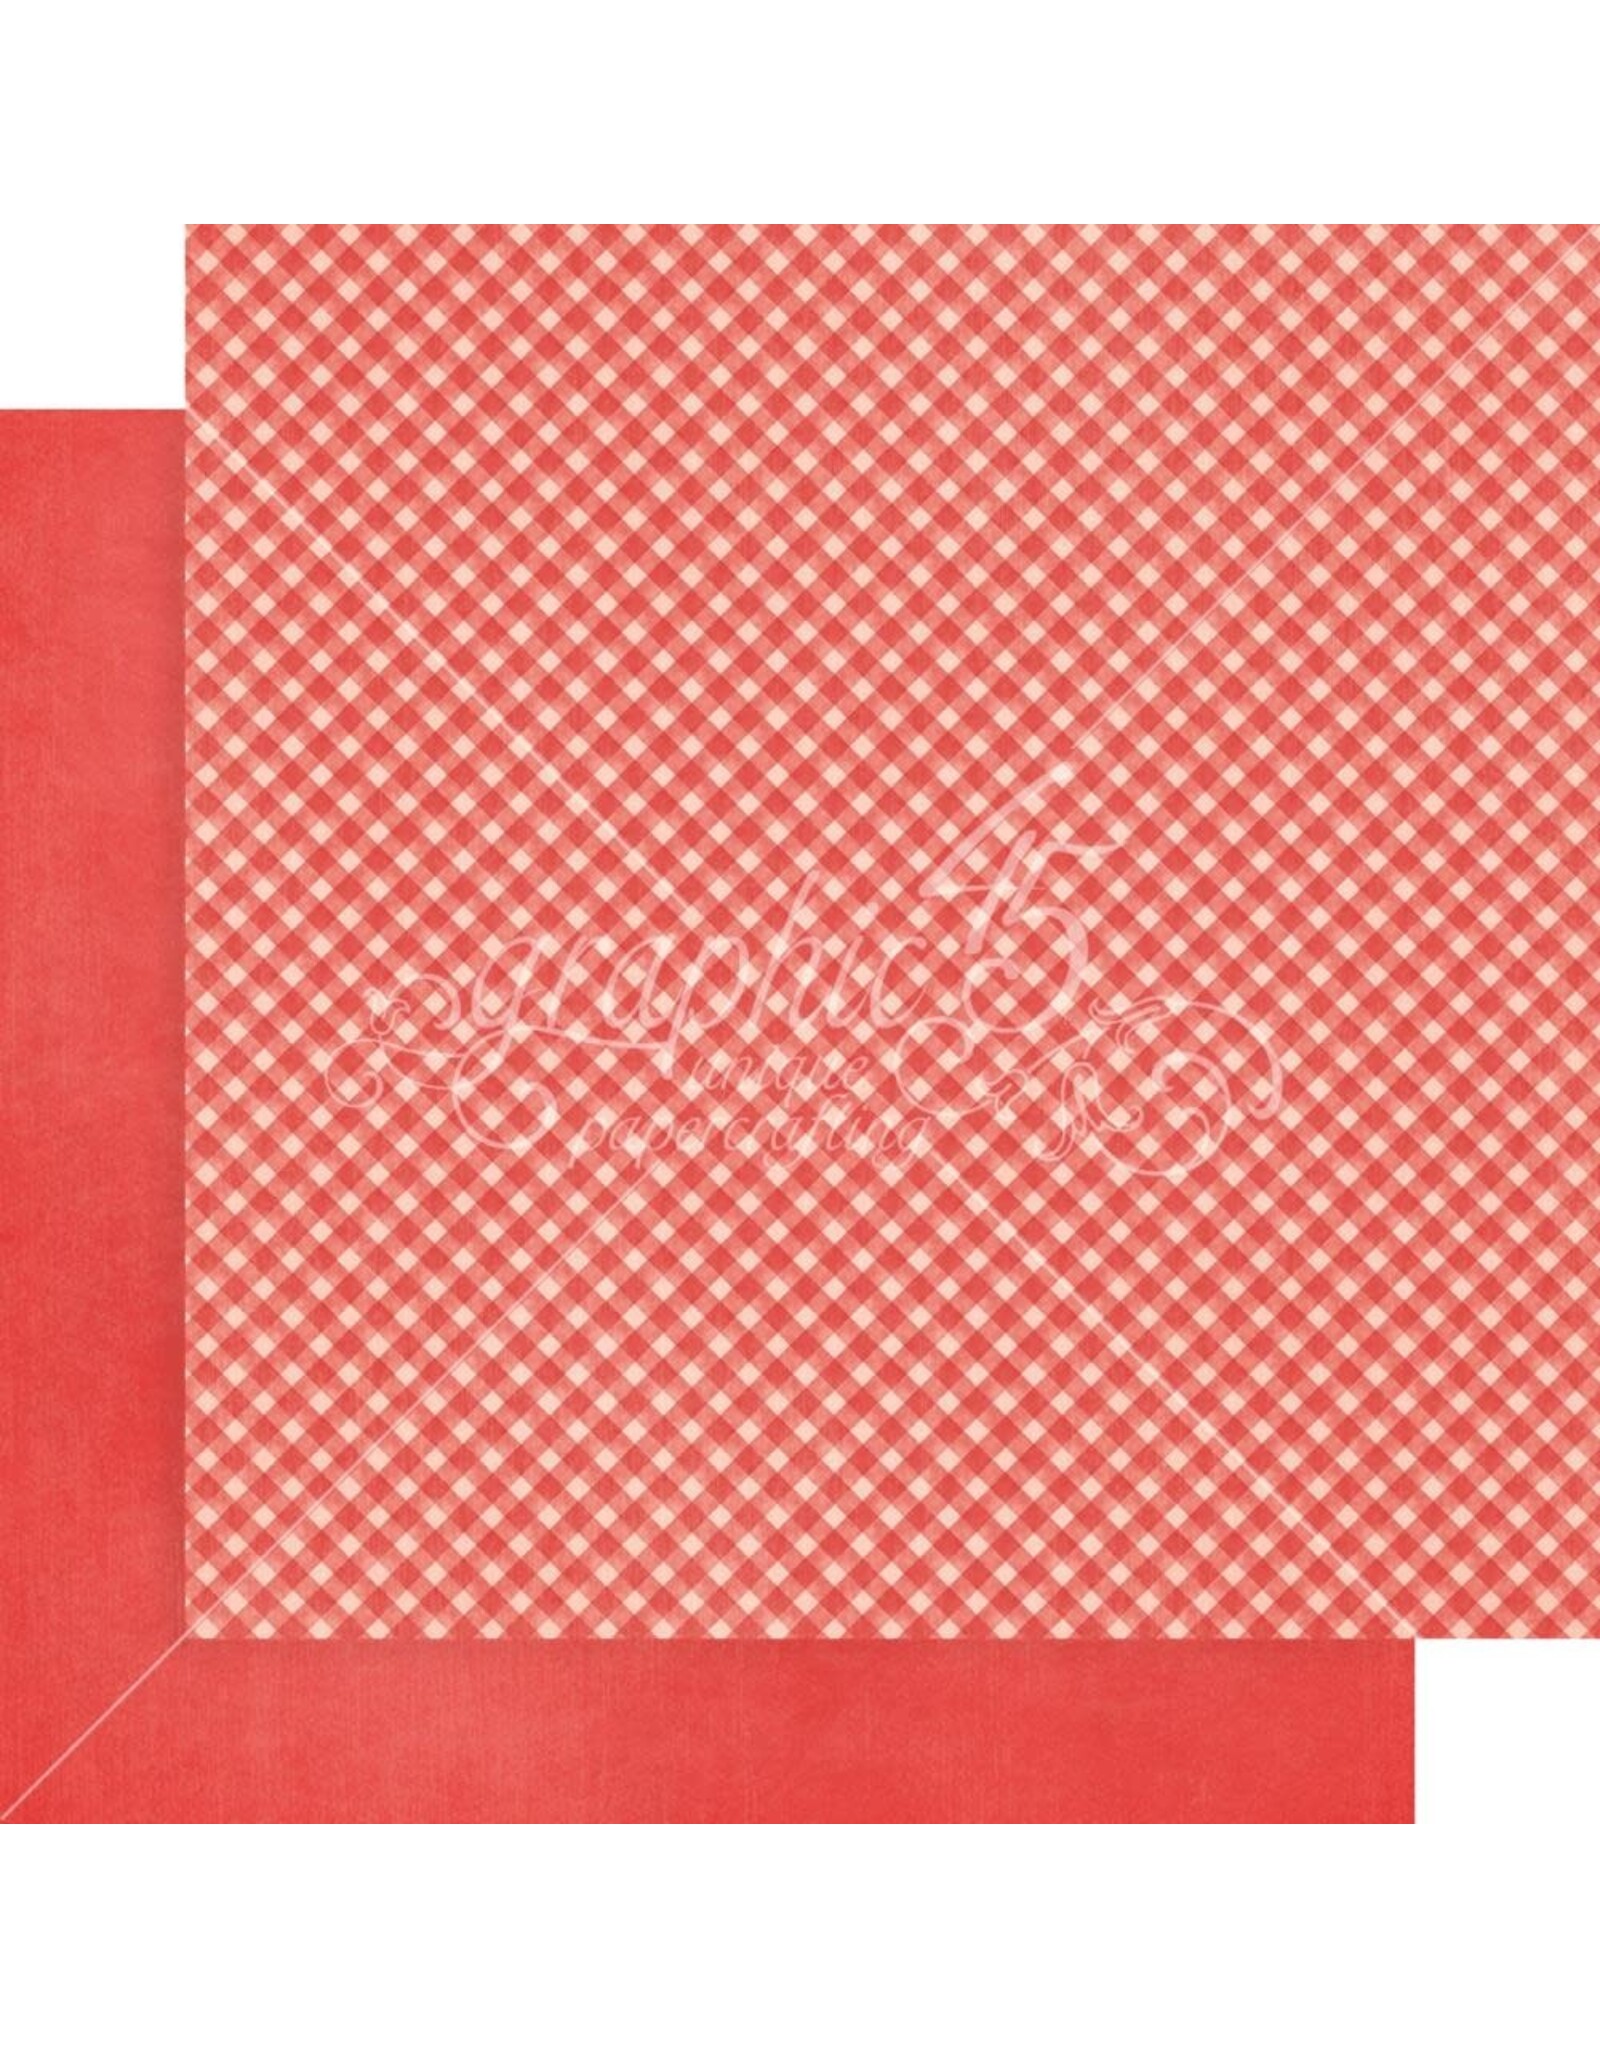 GRAPHIC 45 GRAPHIC 45 SUNSHINE ON MY MIND COLLECTION 12x12 PATTERNS & SOLIDS PACK 16 SHEETS